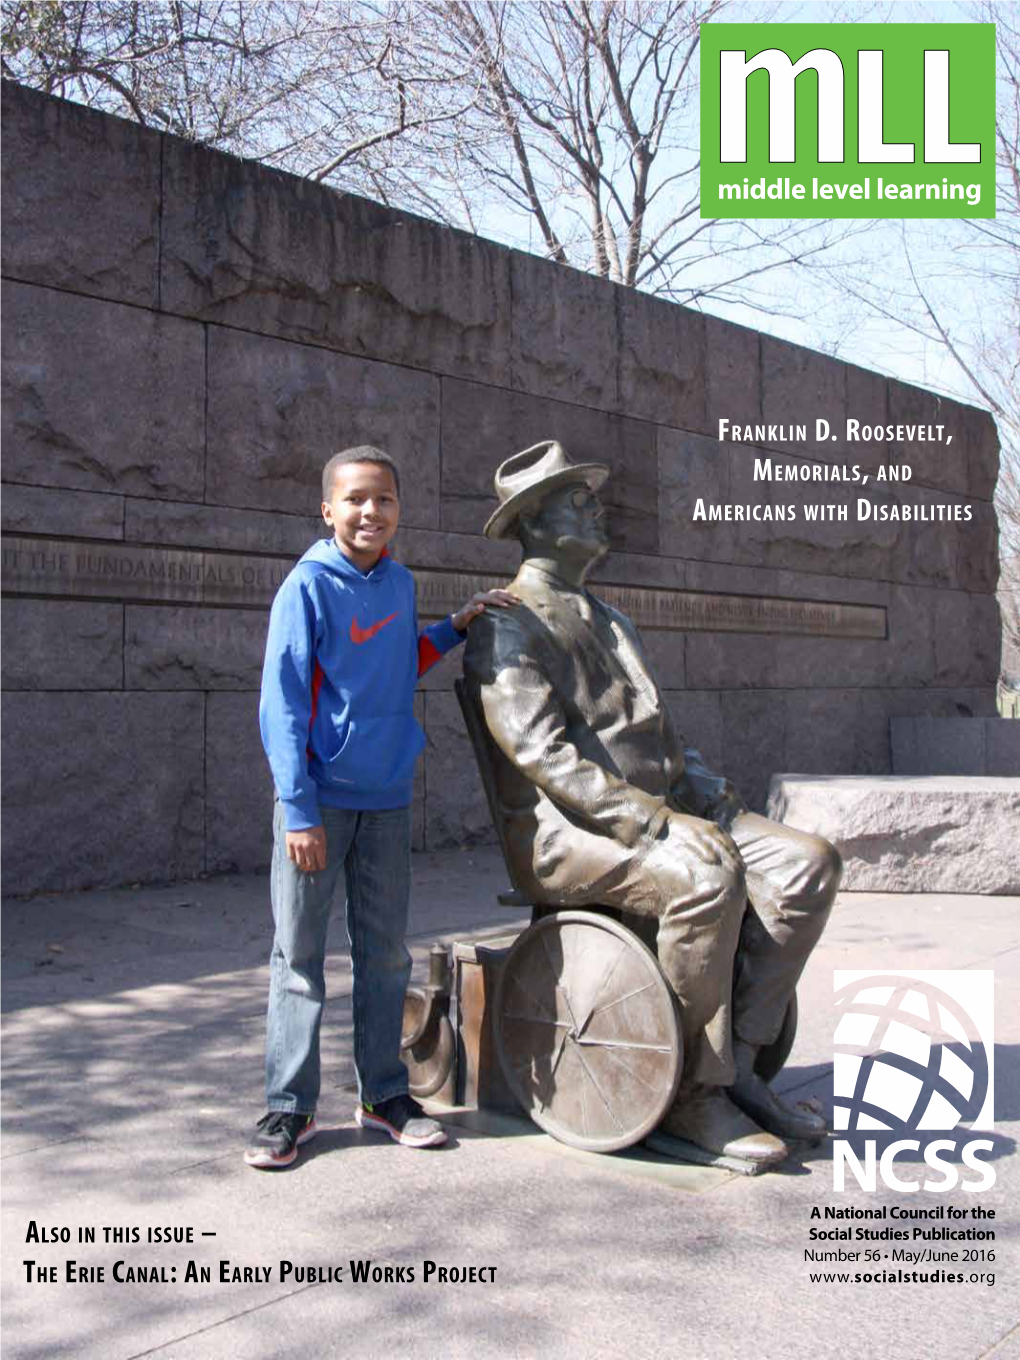 Franklin D. Roosevelt, Memorials, and Americans with Disabilities